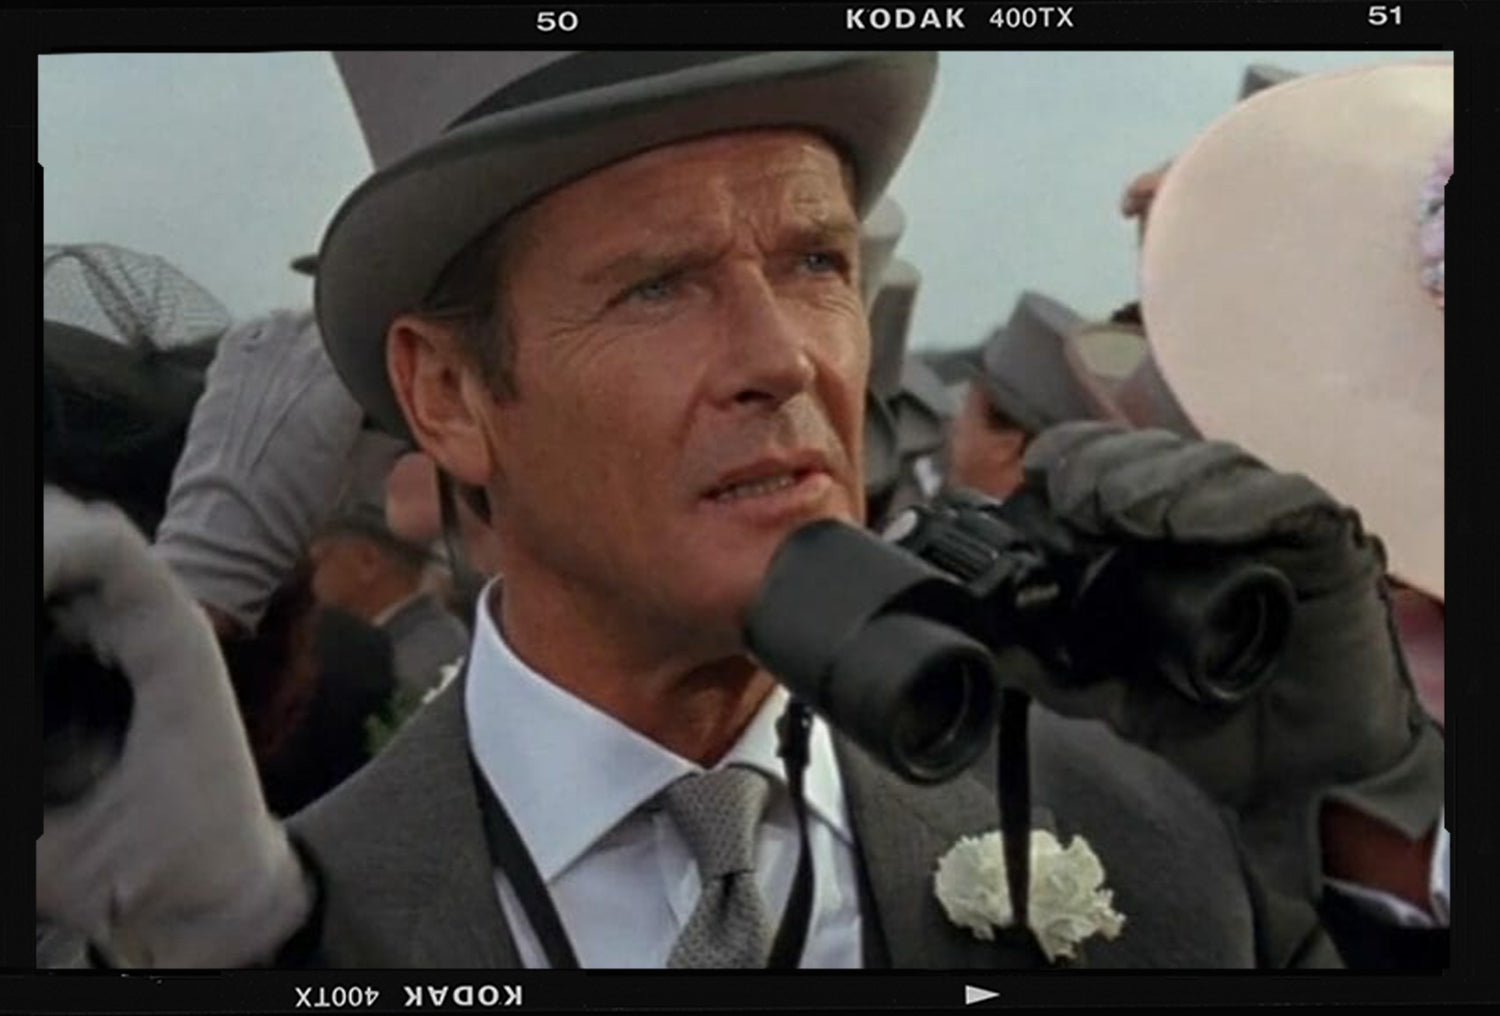 Roger Moore's take on a morning suit in A View to a Kill is a James Bond look we can get behind.